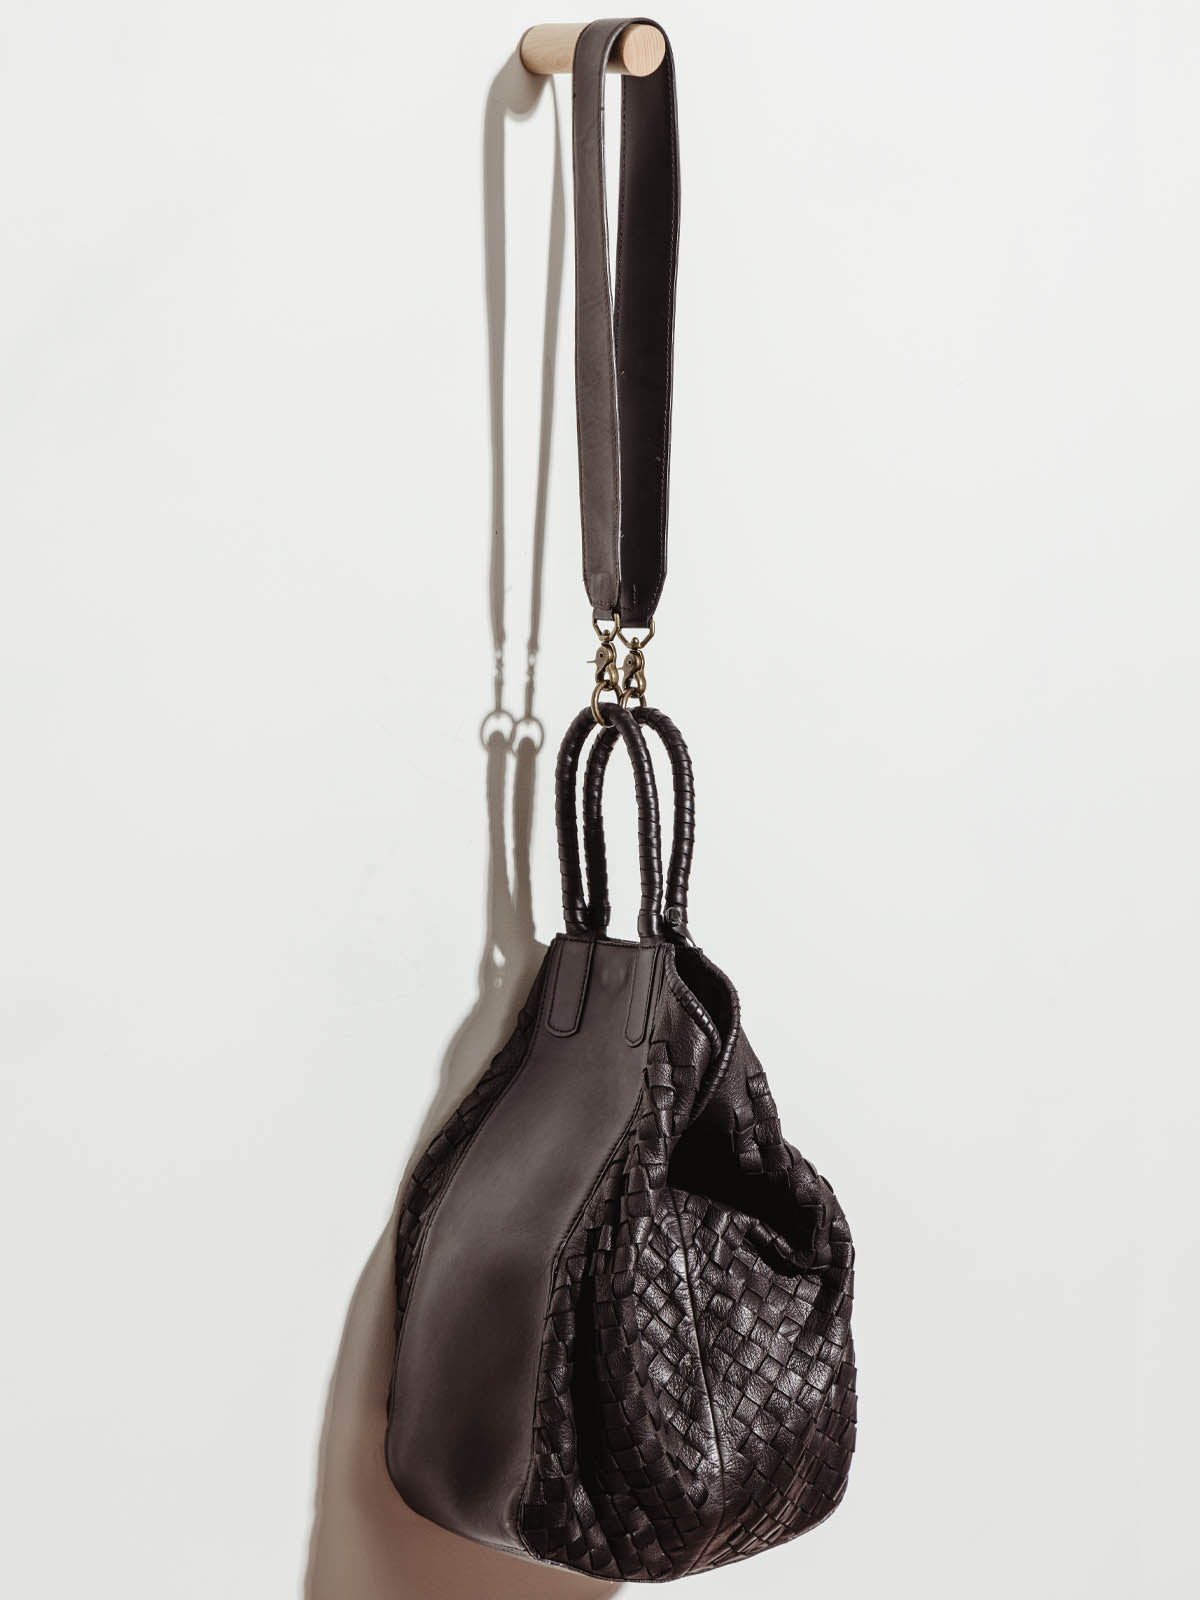 Black leather all day clasped shut, hanging by shoulder strap on white wall